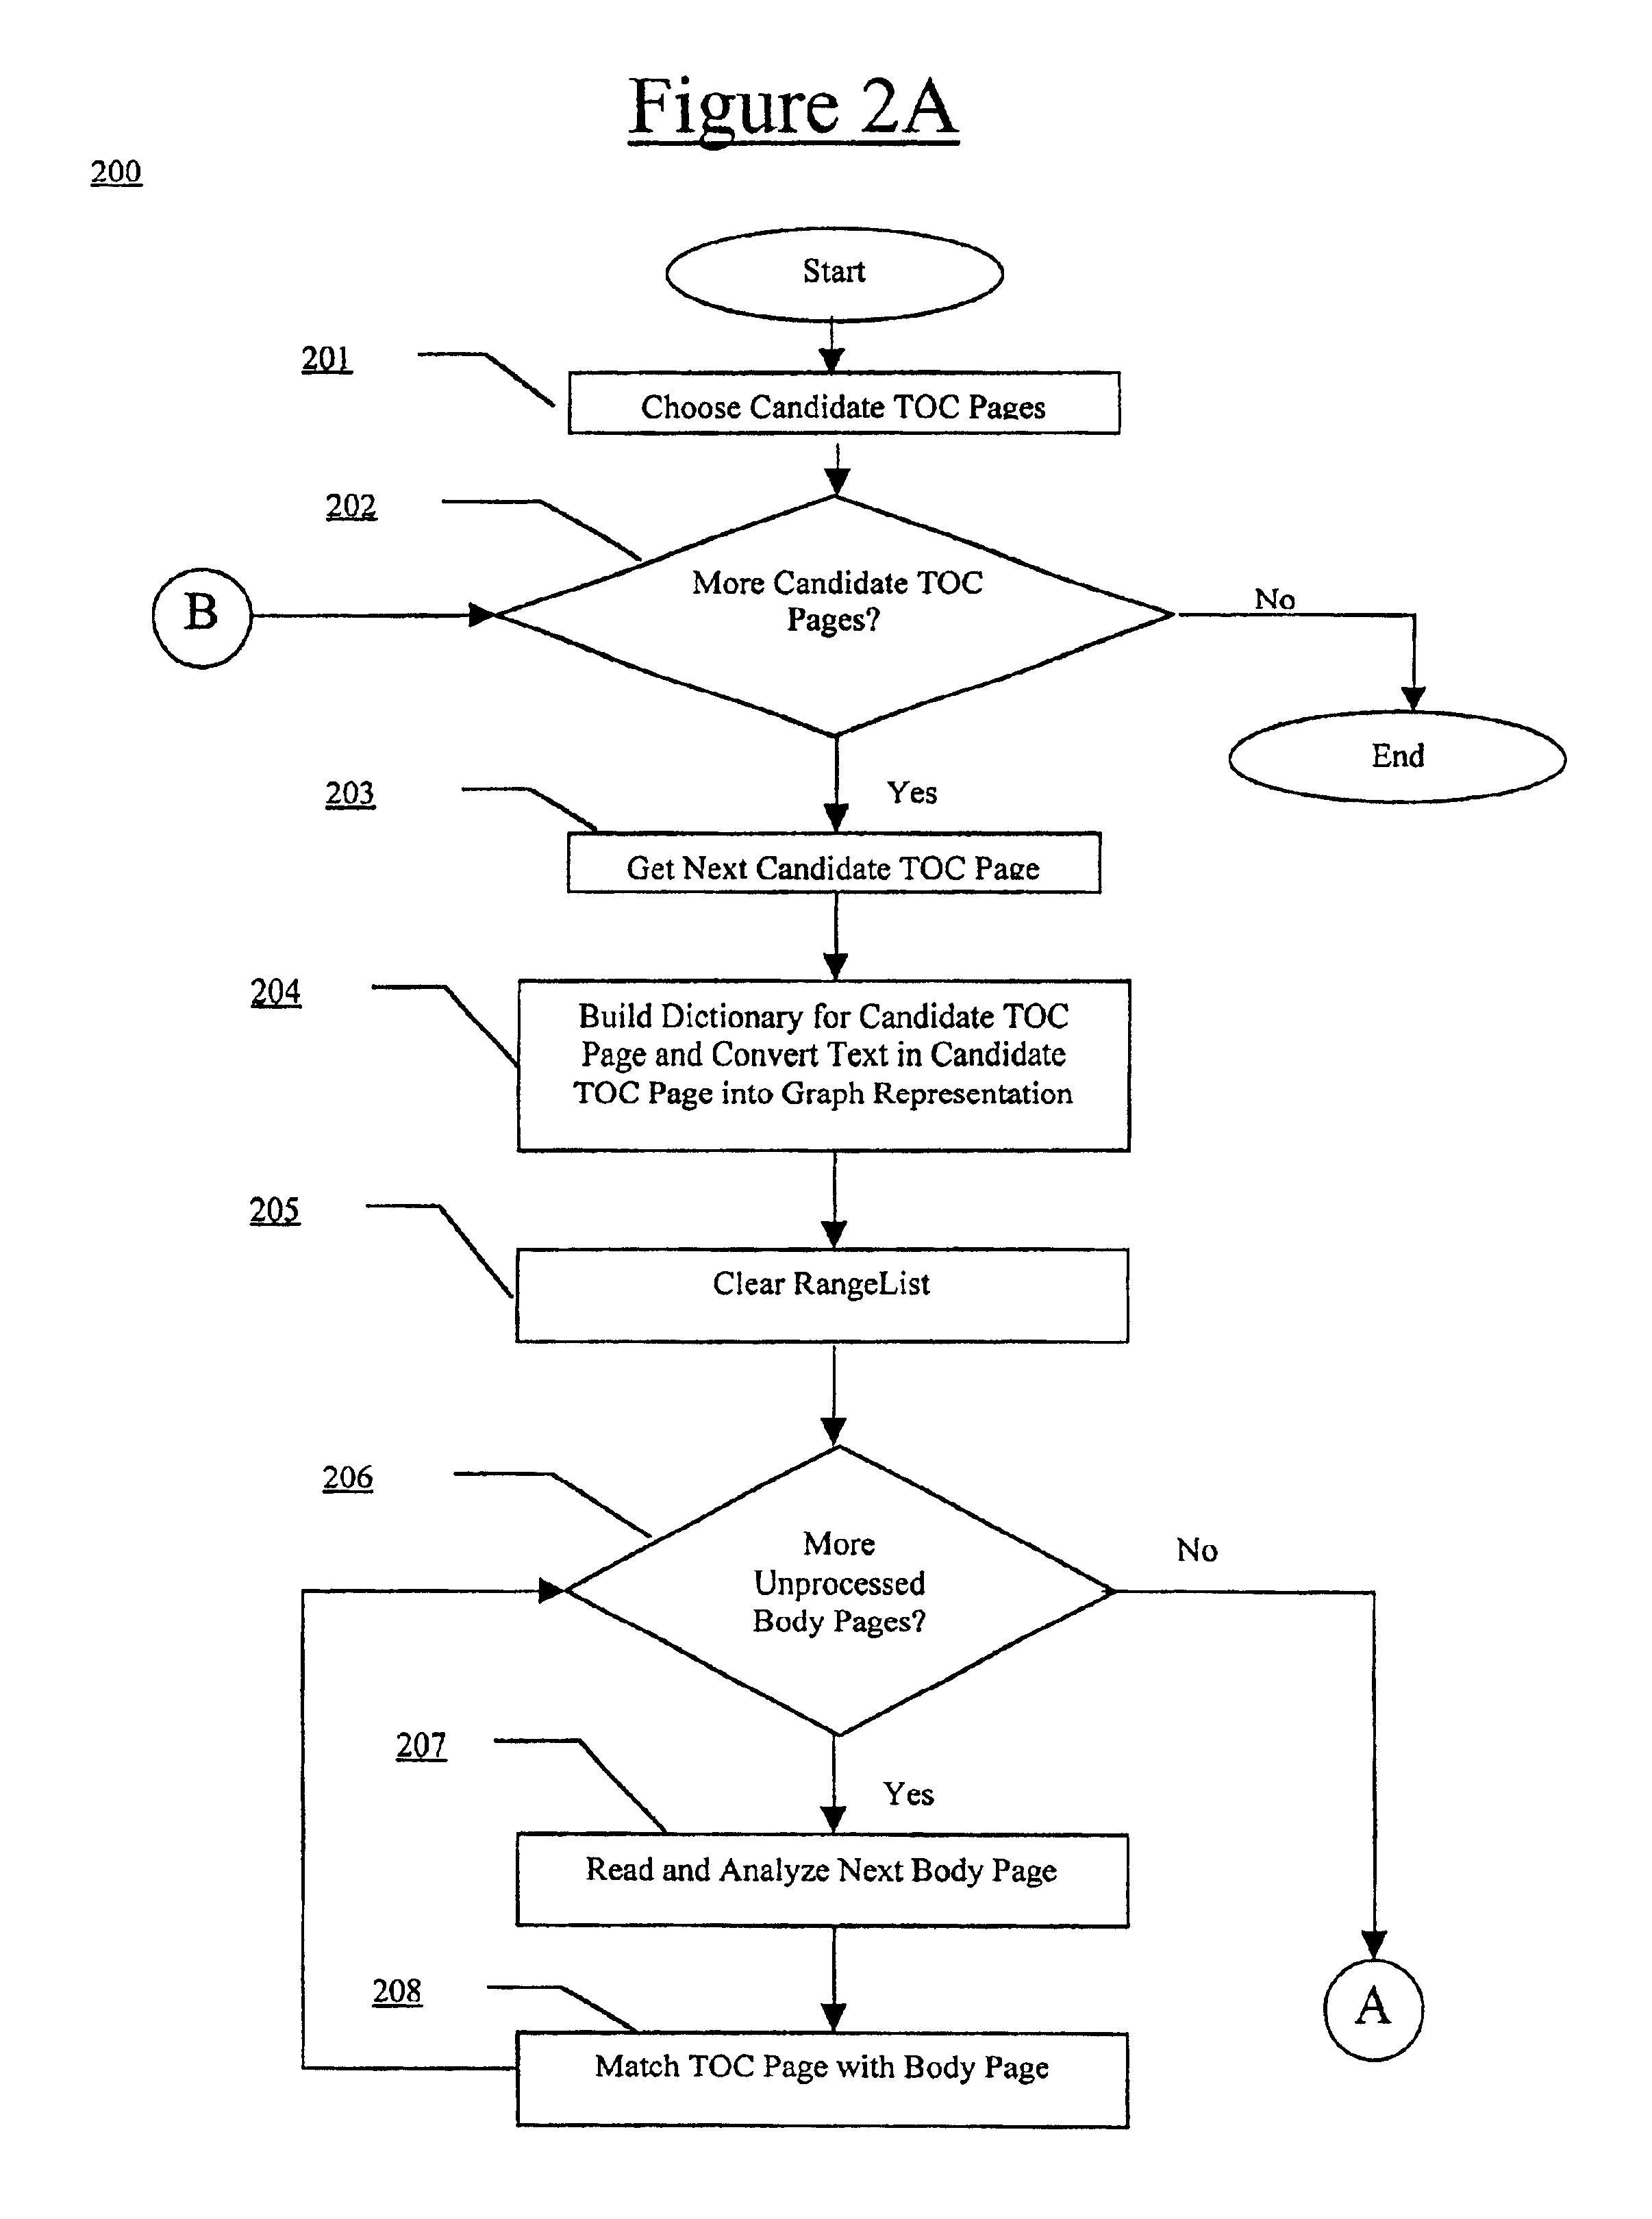 Method for determining a logical structure of a document